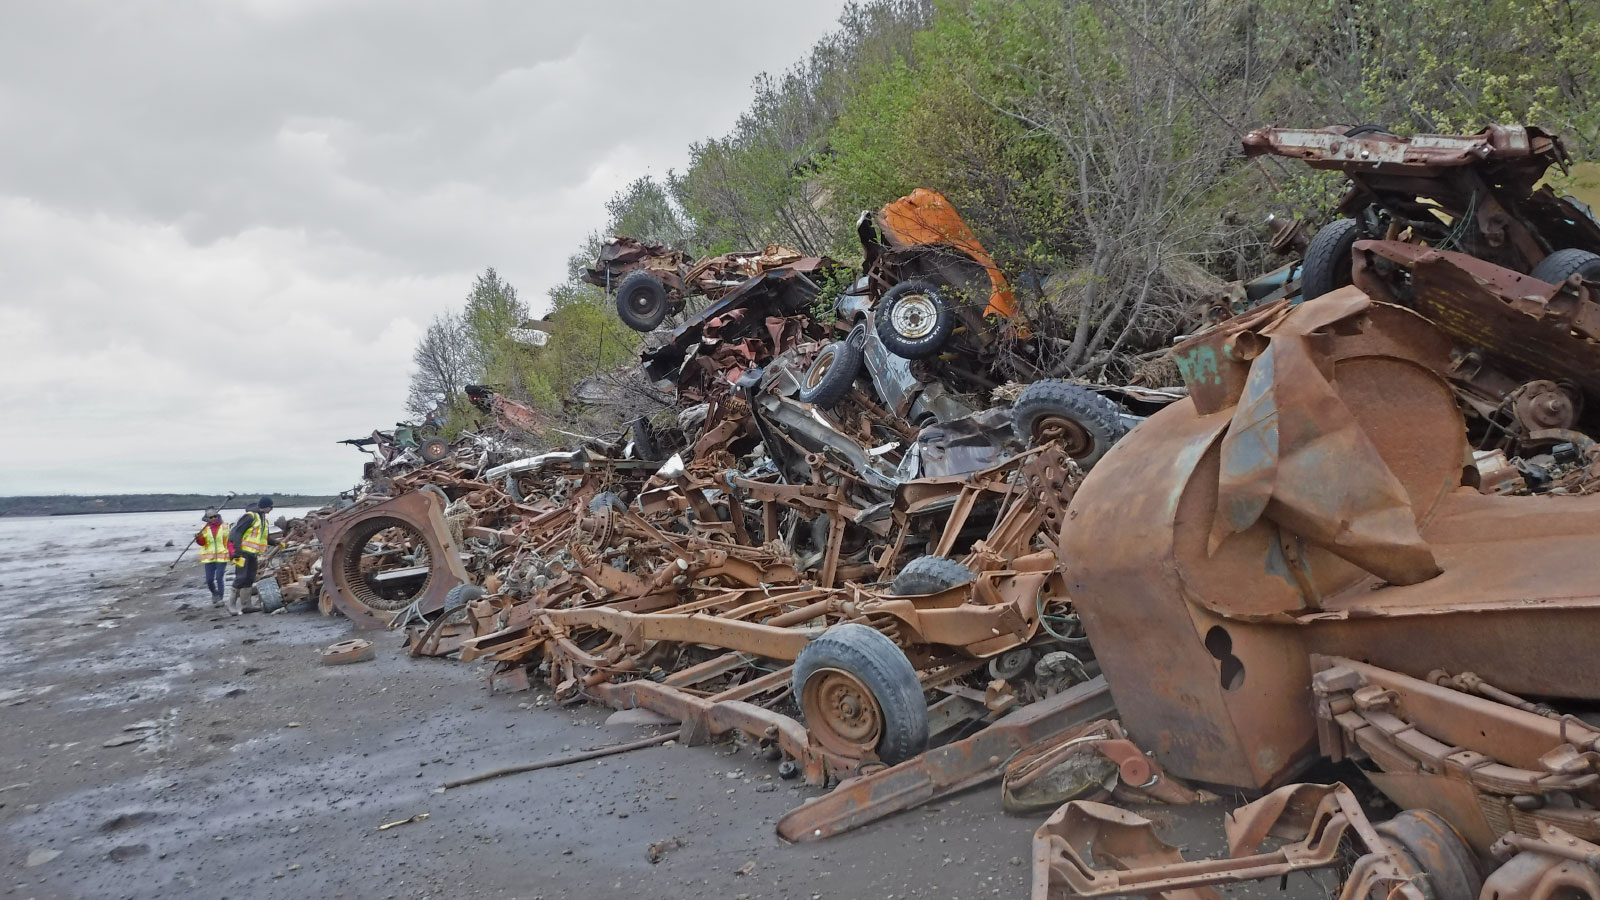 A pile of rusted cars and car parts are used as a barrier against an eroding coastline.